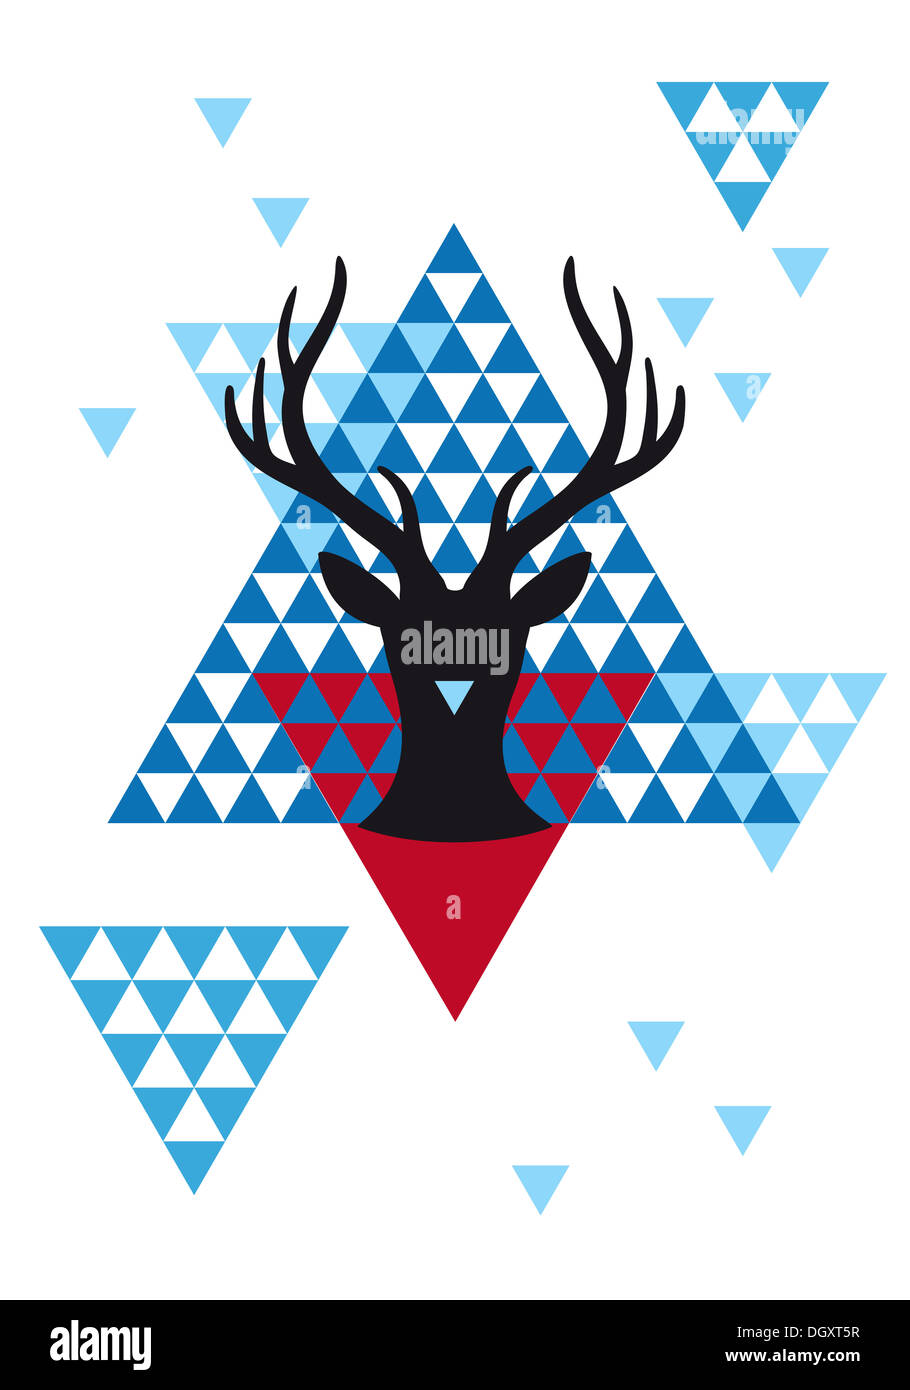 Christmas deer with abstract geometric pattern Stock Photo